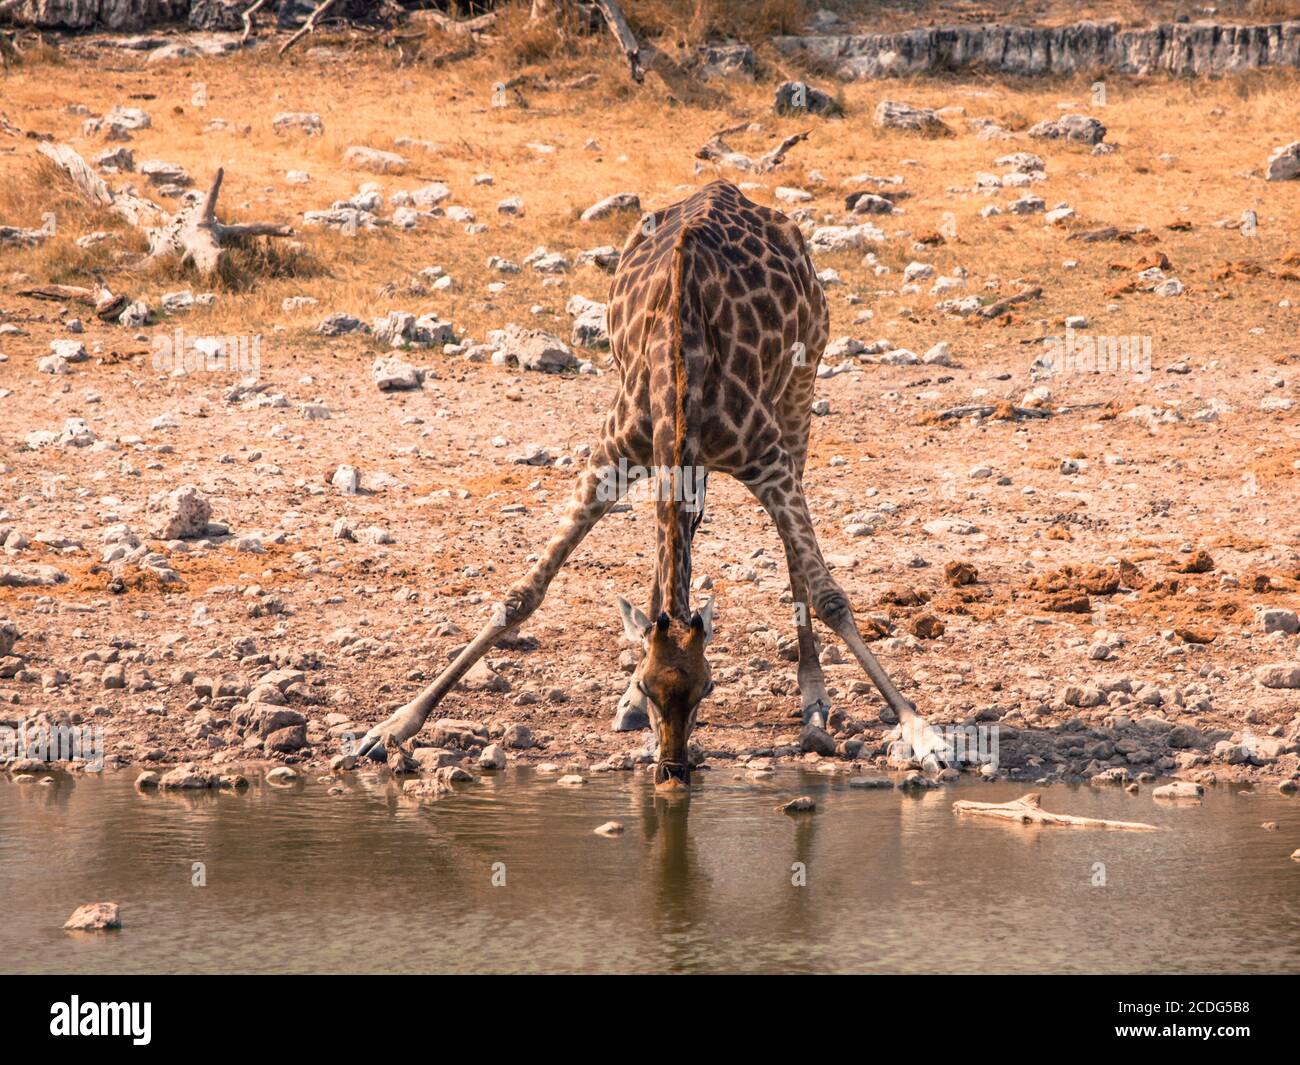 Thirsty giraffe drinking from waterhole in typical pose with wide spread legs, Etosha National Park, Namibia Stock Photo